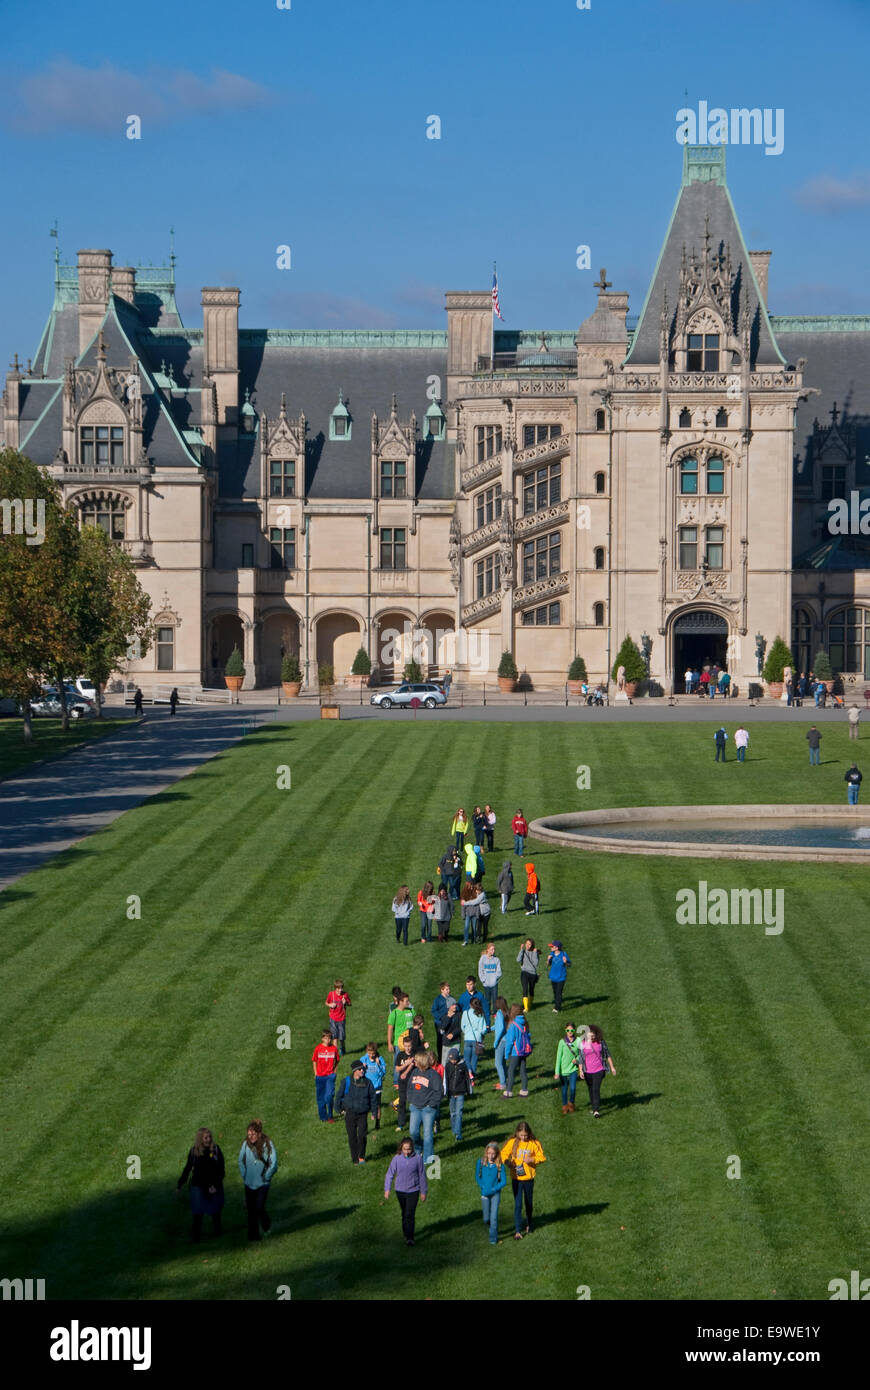 Biltmore Estate Mansion with school students on lawn, Asheville, North Carolina. Stock Photo